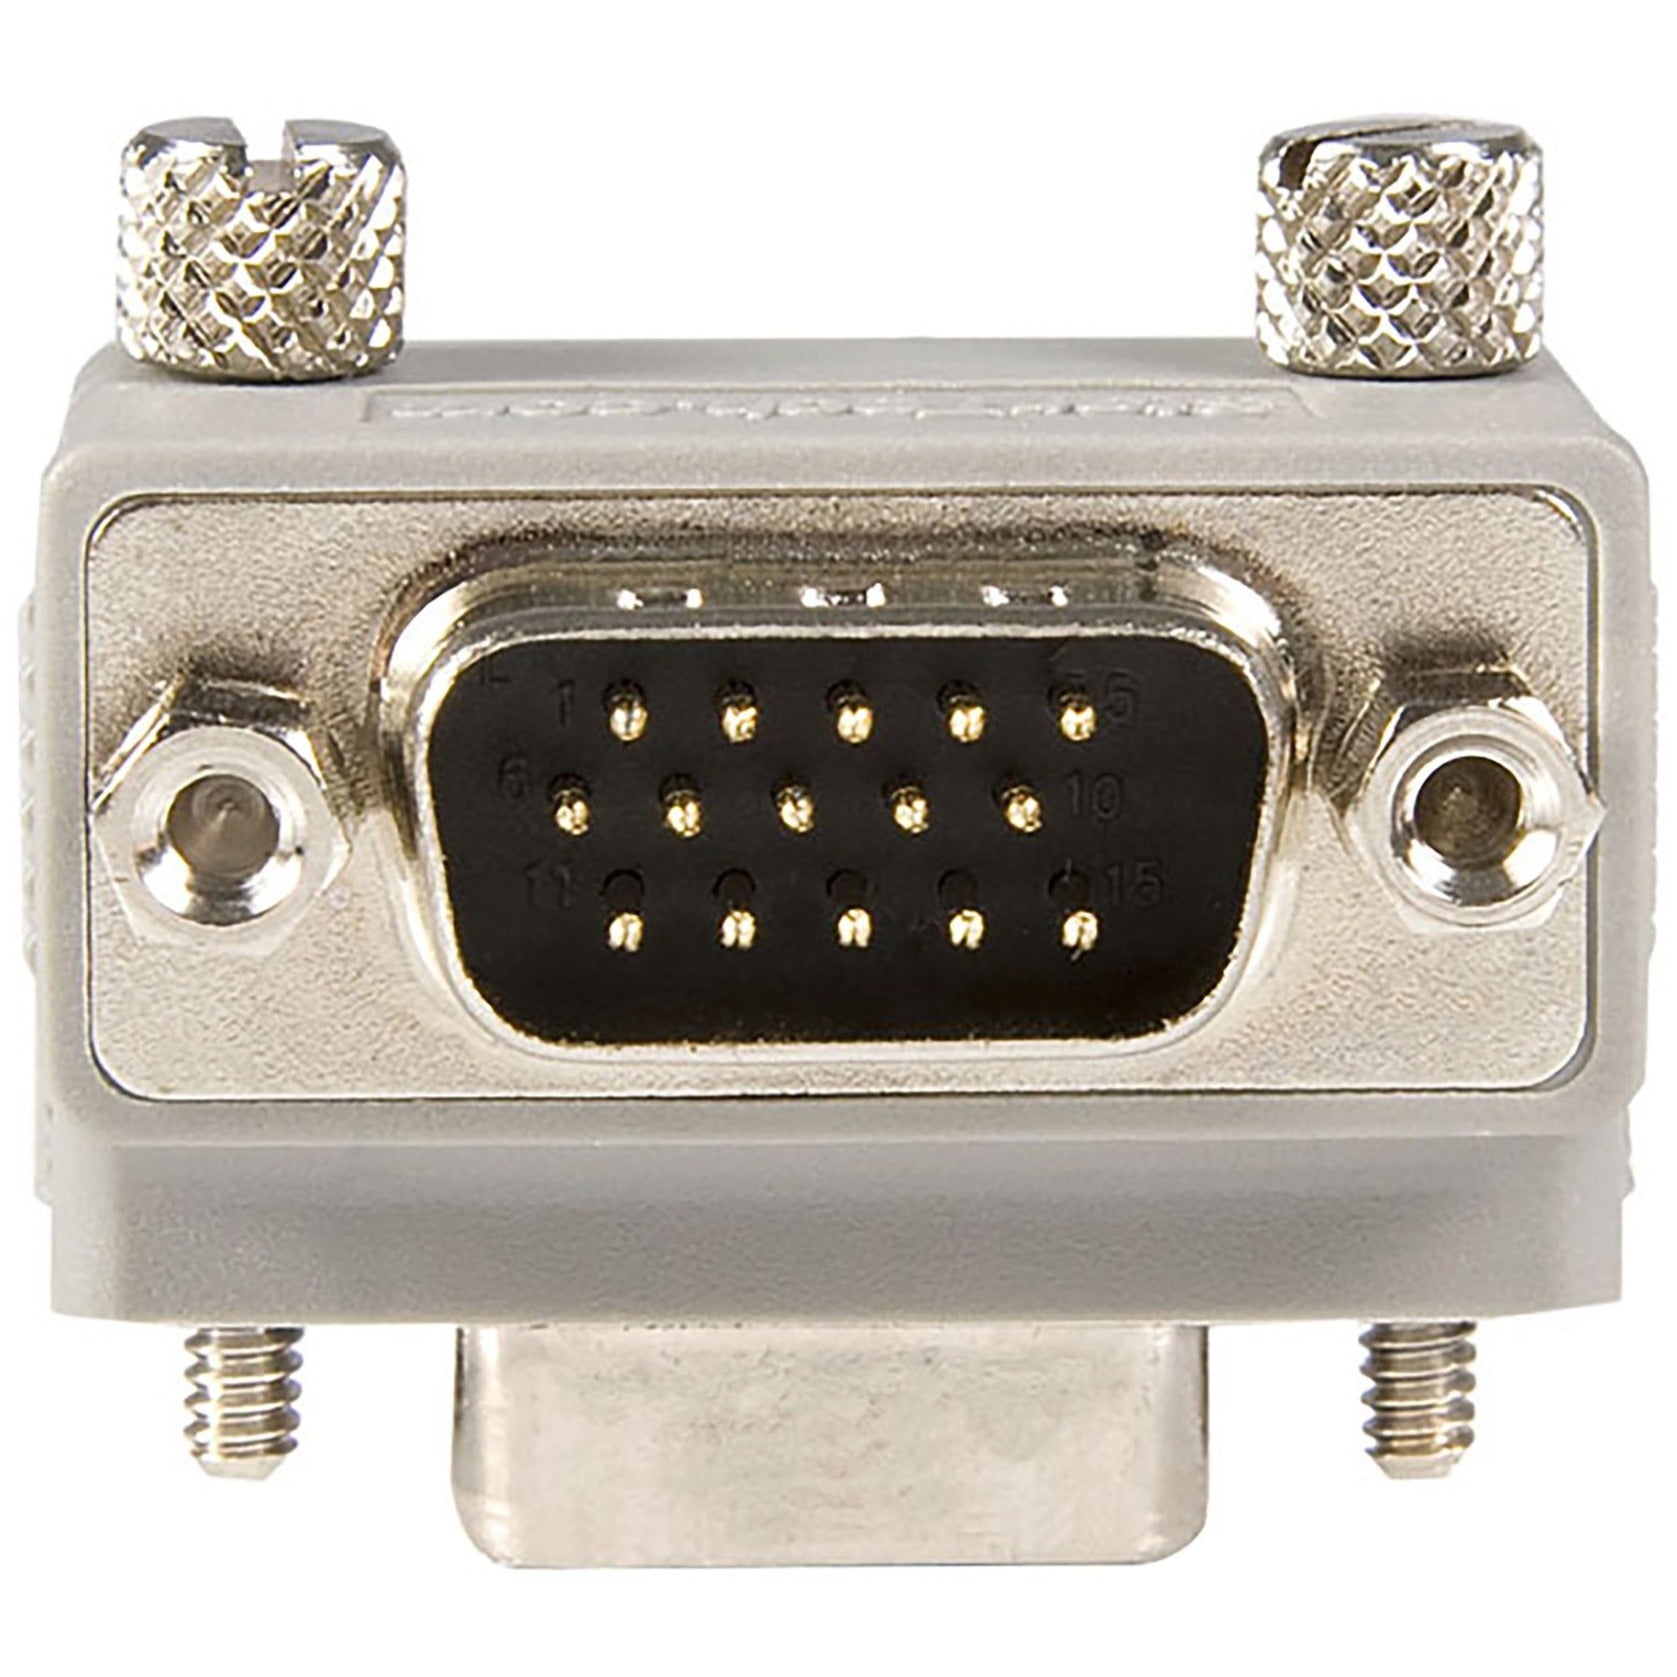 StarTech.com GC1515MFRA2 Right Angle VGA to VGA Cable Adapter Type 2 - M/F, Right-Angled Connector, Gray